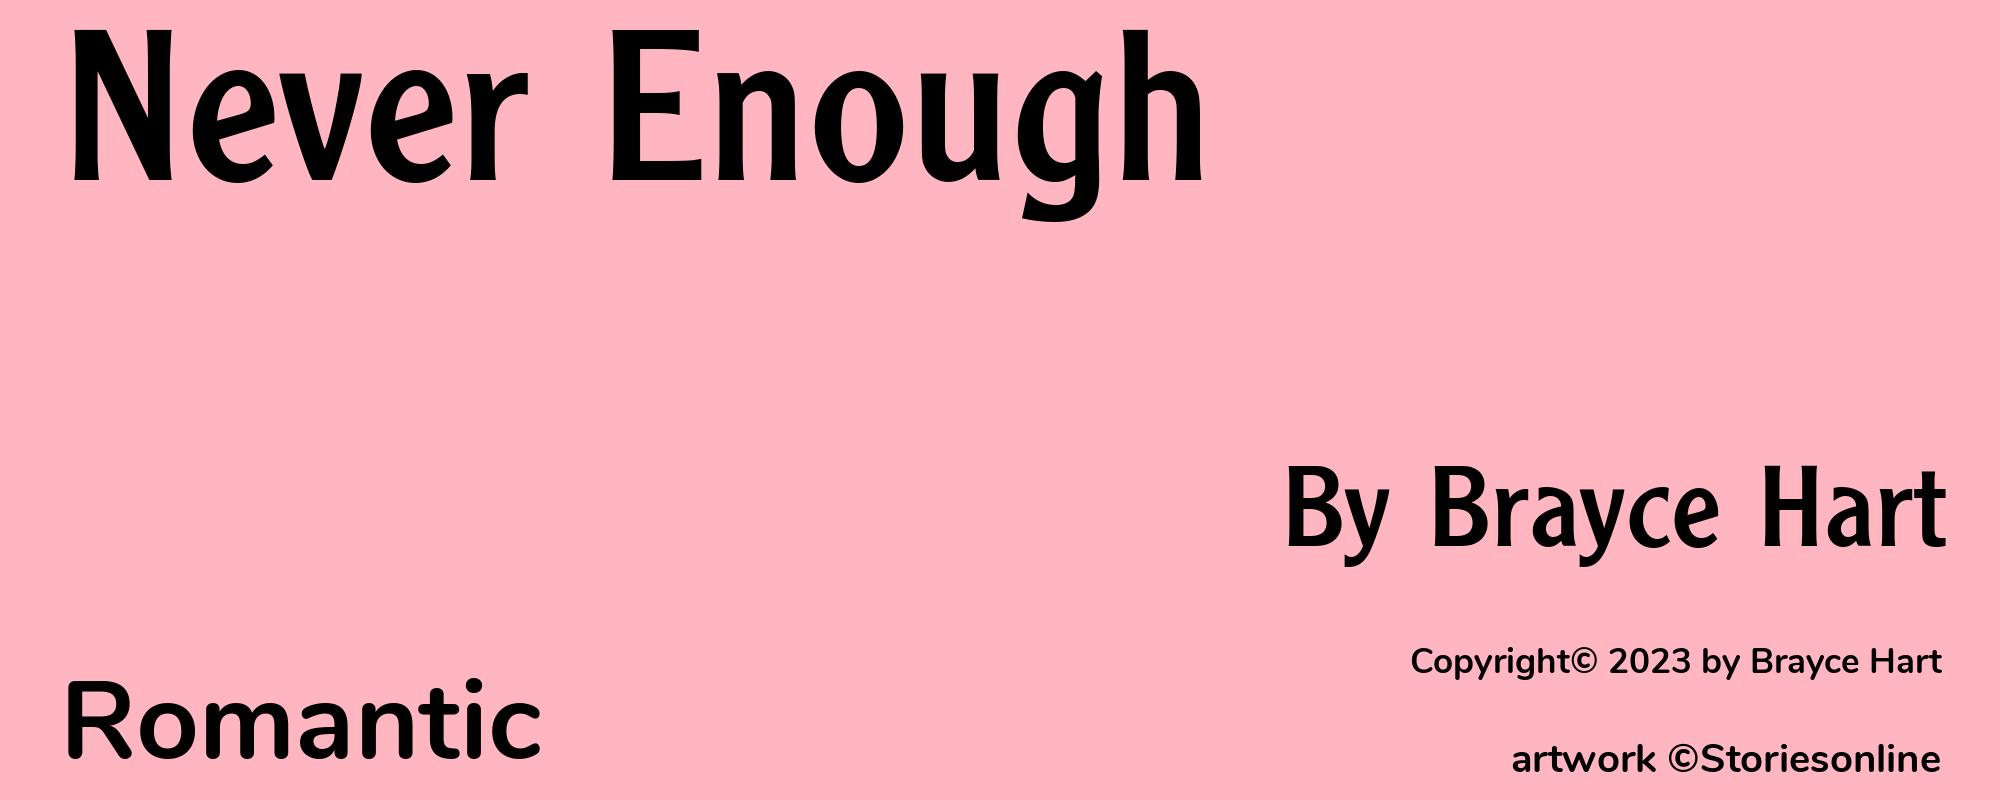 Never Enough - Cover